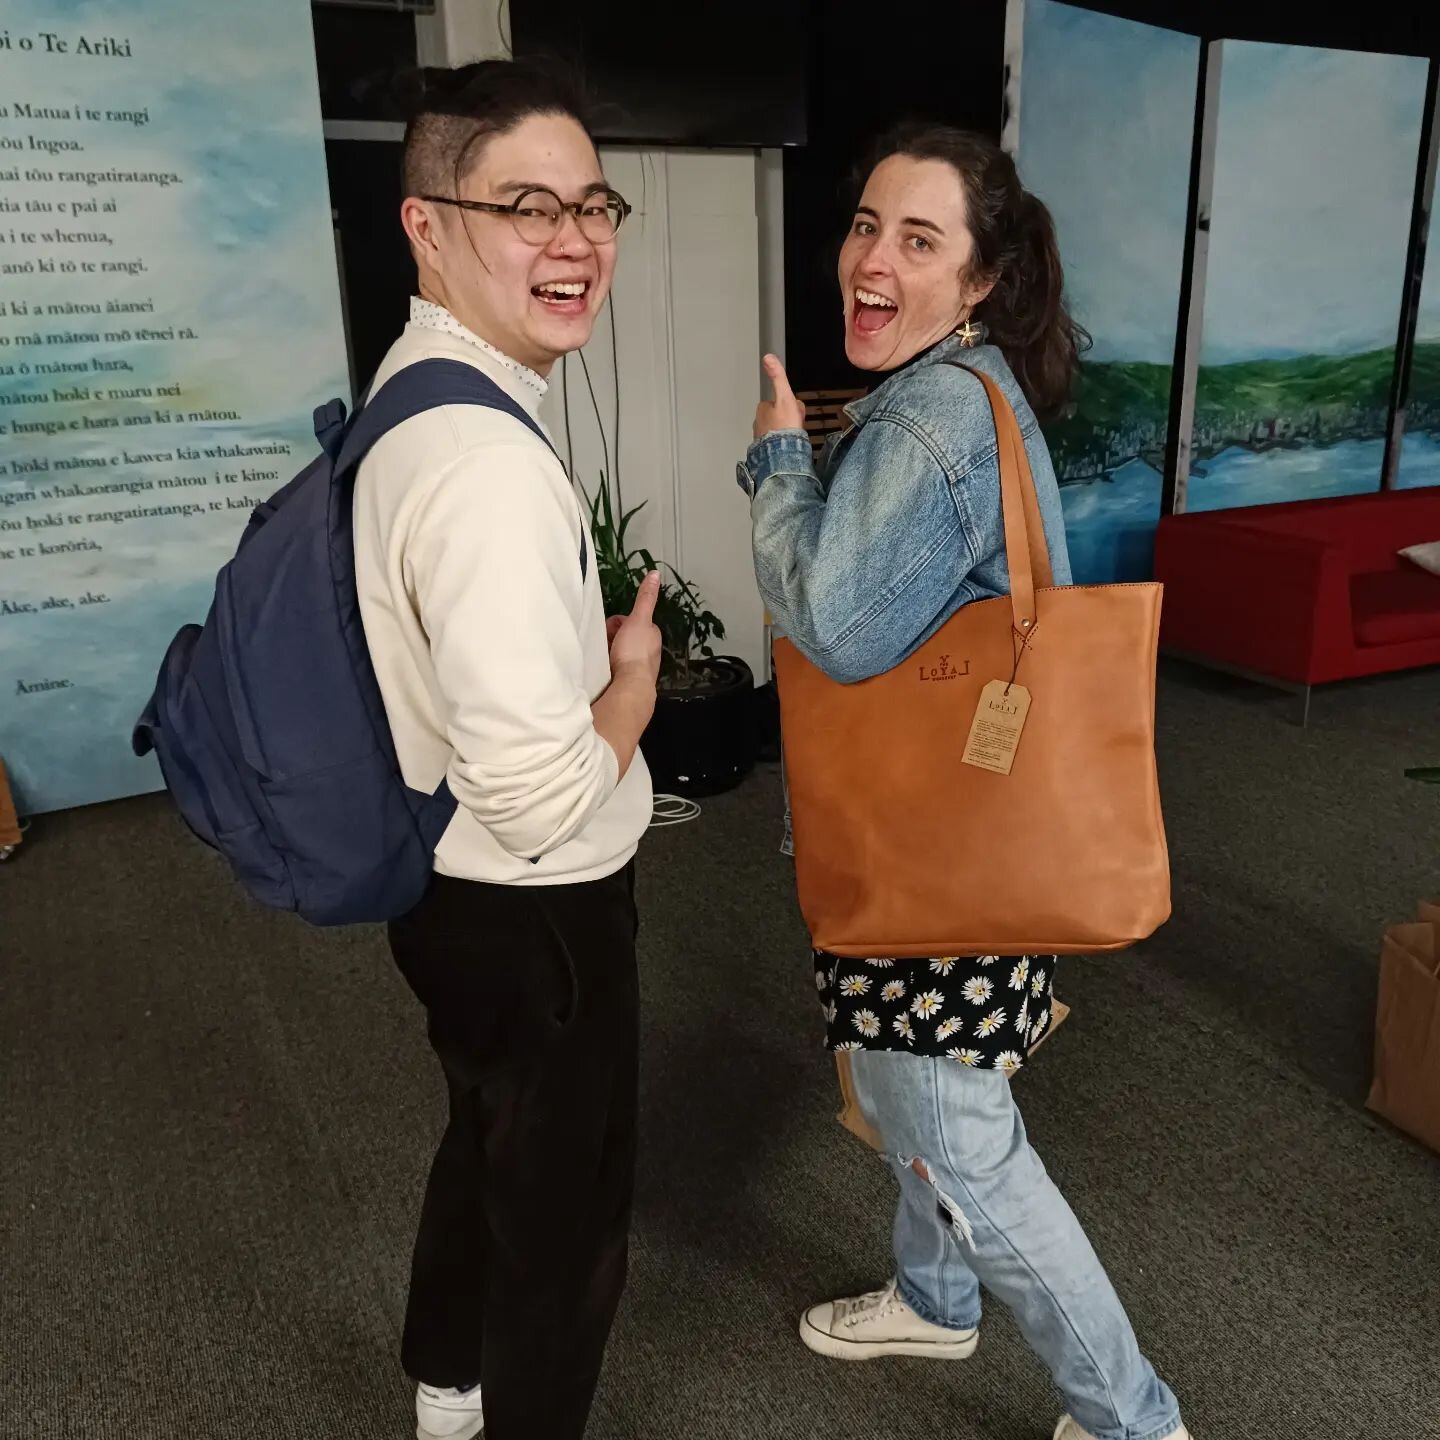 ROSE'S LAST DAY!! Today is Rose's last day working at Blueprint. Thank you Rose for all the amazing mahi you have done in this space! 🚀

Feel free to message Rose some words of encouragement.

Important update: Danyon picked up the bag in the end as